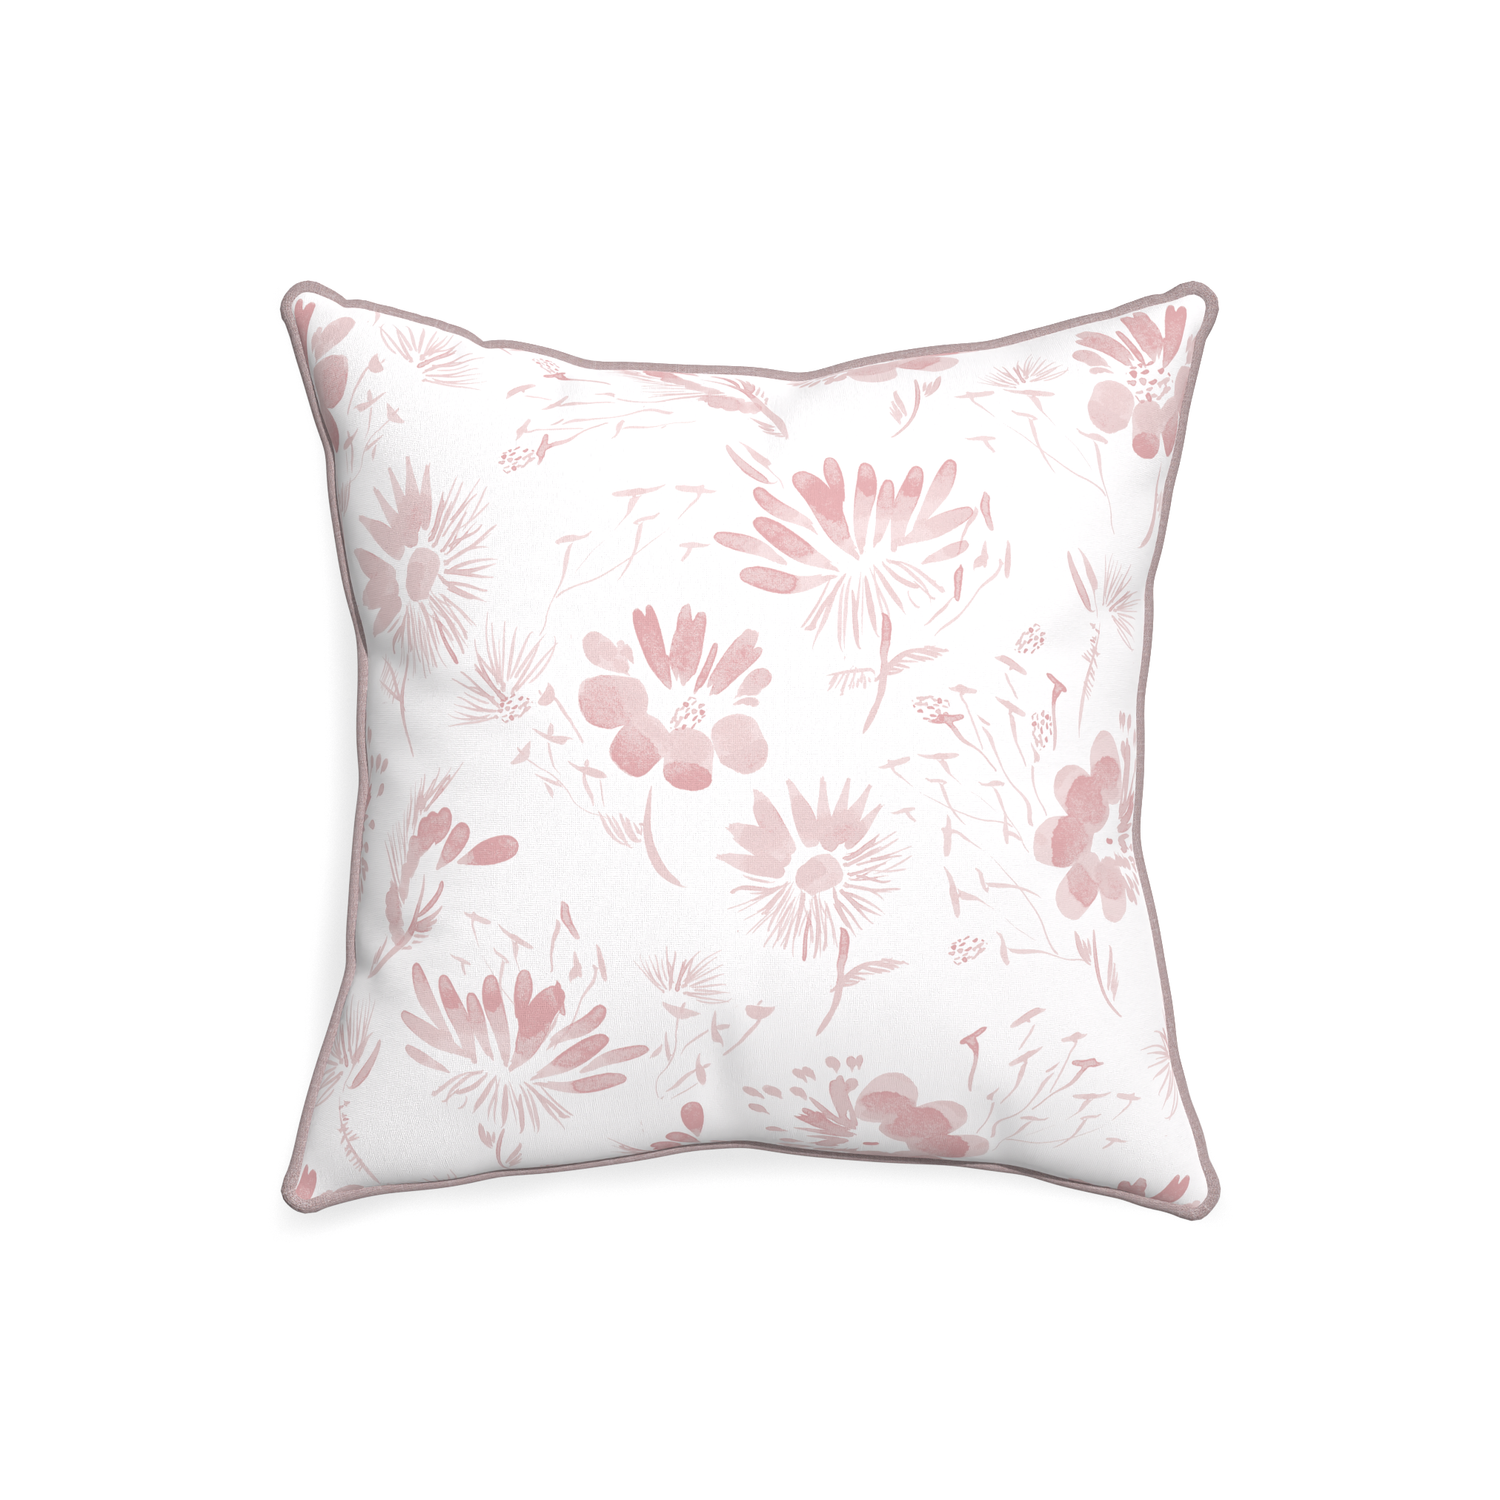 20-square blake custom pink floralpillow with orchid piping on white background